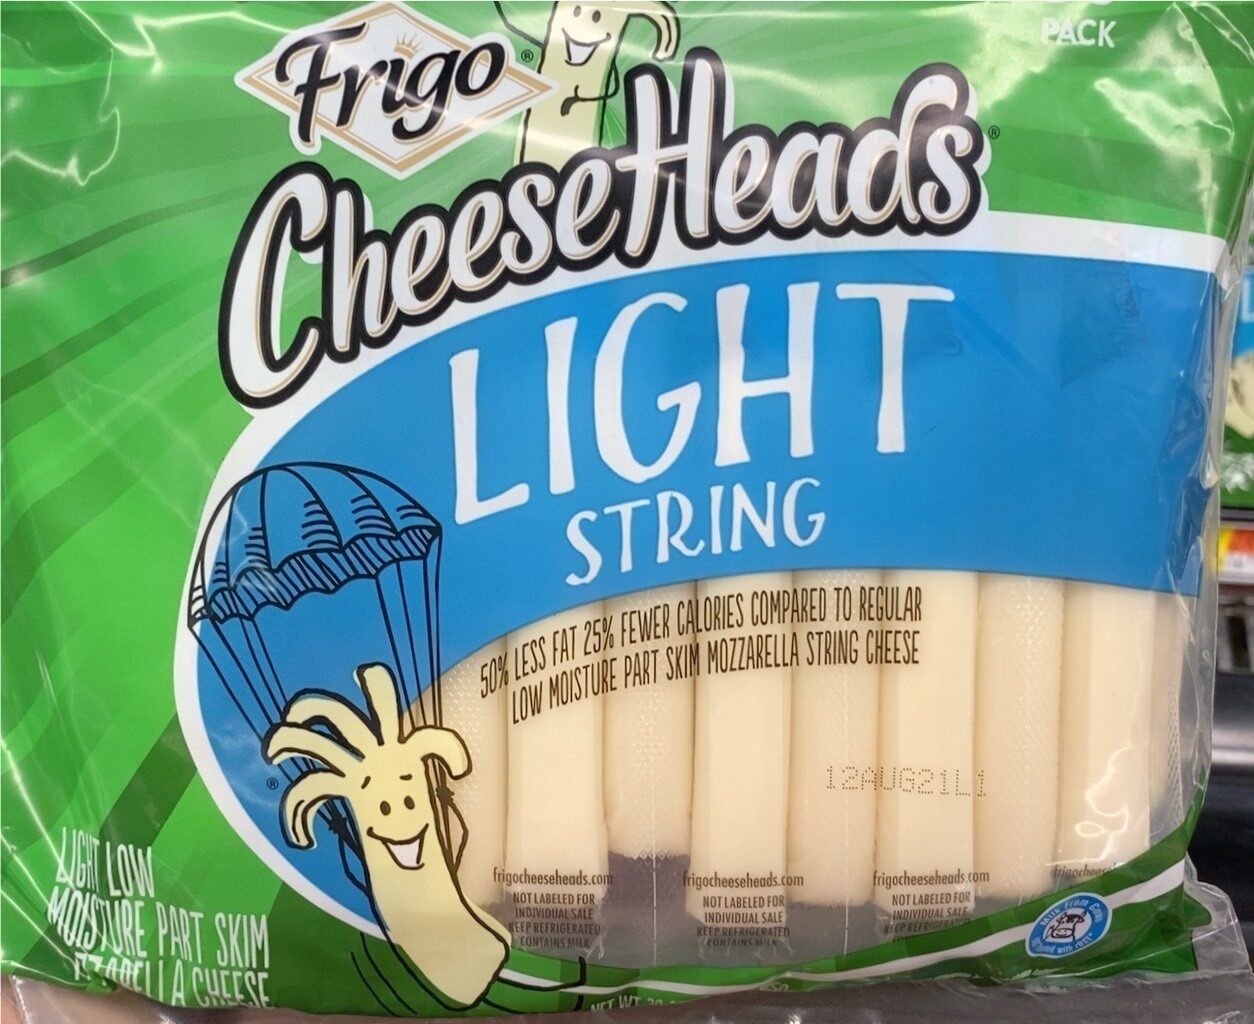 Cheeseheads light string cheese - Prodotto - en